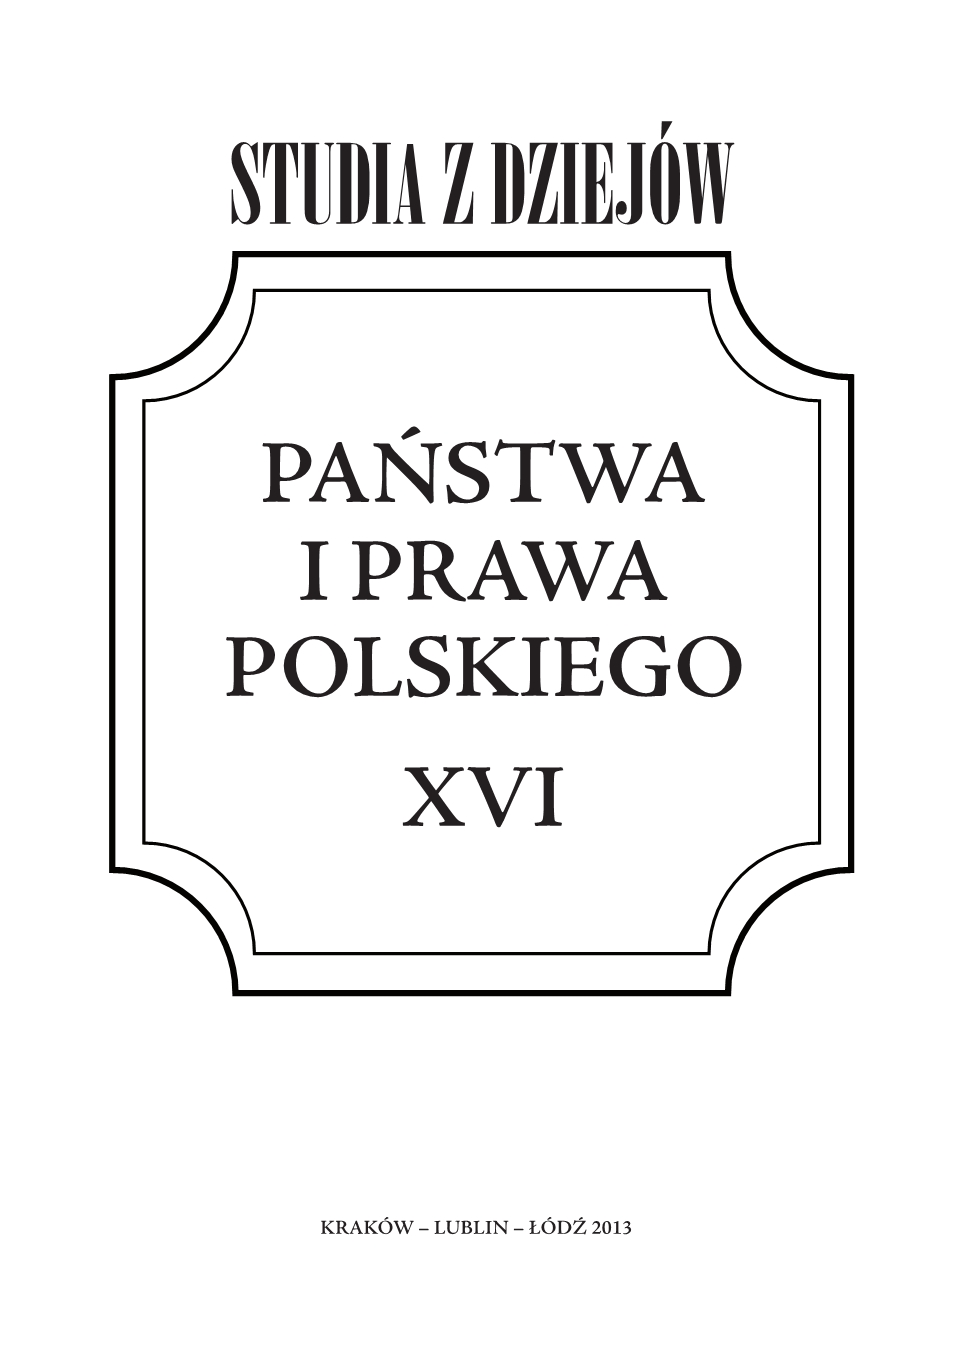 Maidens, married women, and widows before the justice of peace: law and practice in the Kingdom of Poland, study of the acts of justices of peace of the Łęczycki, Zgierski, and Łódzki districts Cover Image